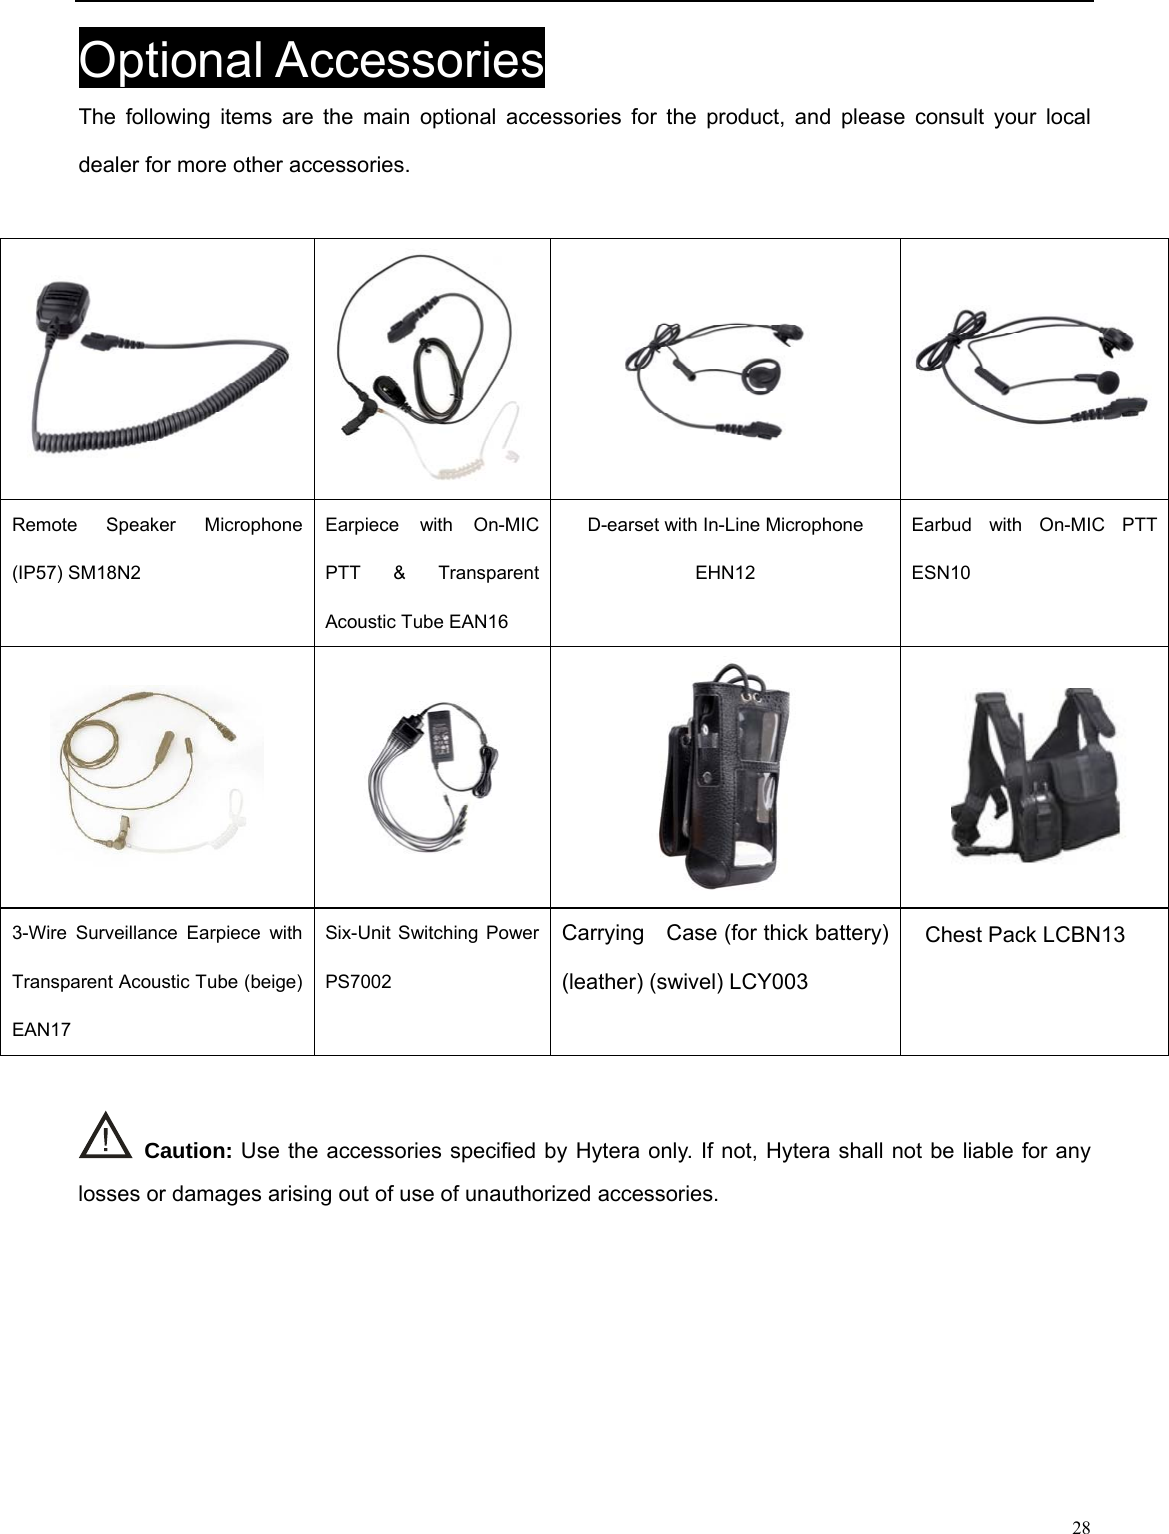                                                                                                            Optional Accessories The following items are the main optional accessories for the product, and please consult your local dealer for more other accessories.   Remote Speaker Microphone (IP57) SM18N2   Earpiece with On-MIC PTT &amp; Transparent Acoustic Tube EAN16   D-earset with In-Line Microphone EHN12 Earbud with On-MIC PTT ESN10       Carrying    Case (for thick battery) (leather) (swivel) LCY003 3-Wire Surveillance Earpiece with Transparent Acoustic Tube (beige) EAN17 Six-Unit Switching Power   PS7002    Caution: Use the accessories specified by Hytera only. If not, Hytera shall not be liable for any losses or damages arising out of use of unauthorized accessories.      28 Chest Pack LCBN13 